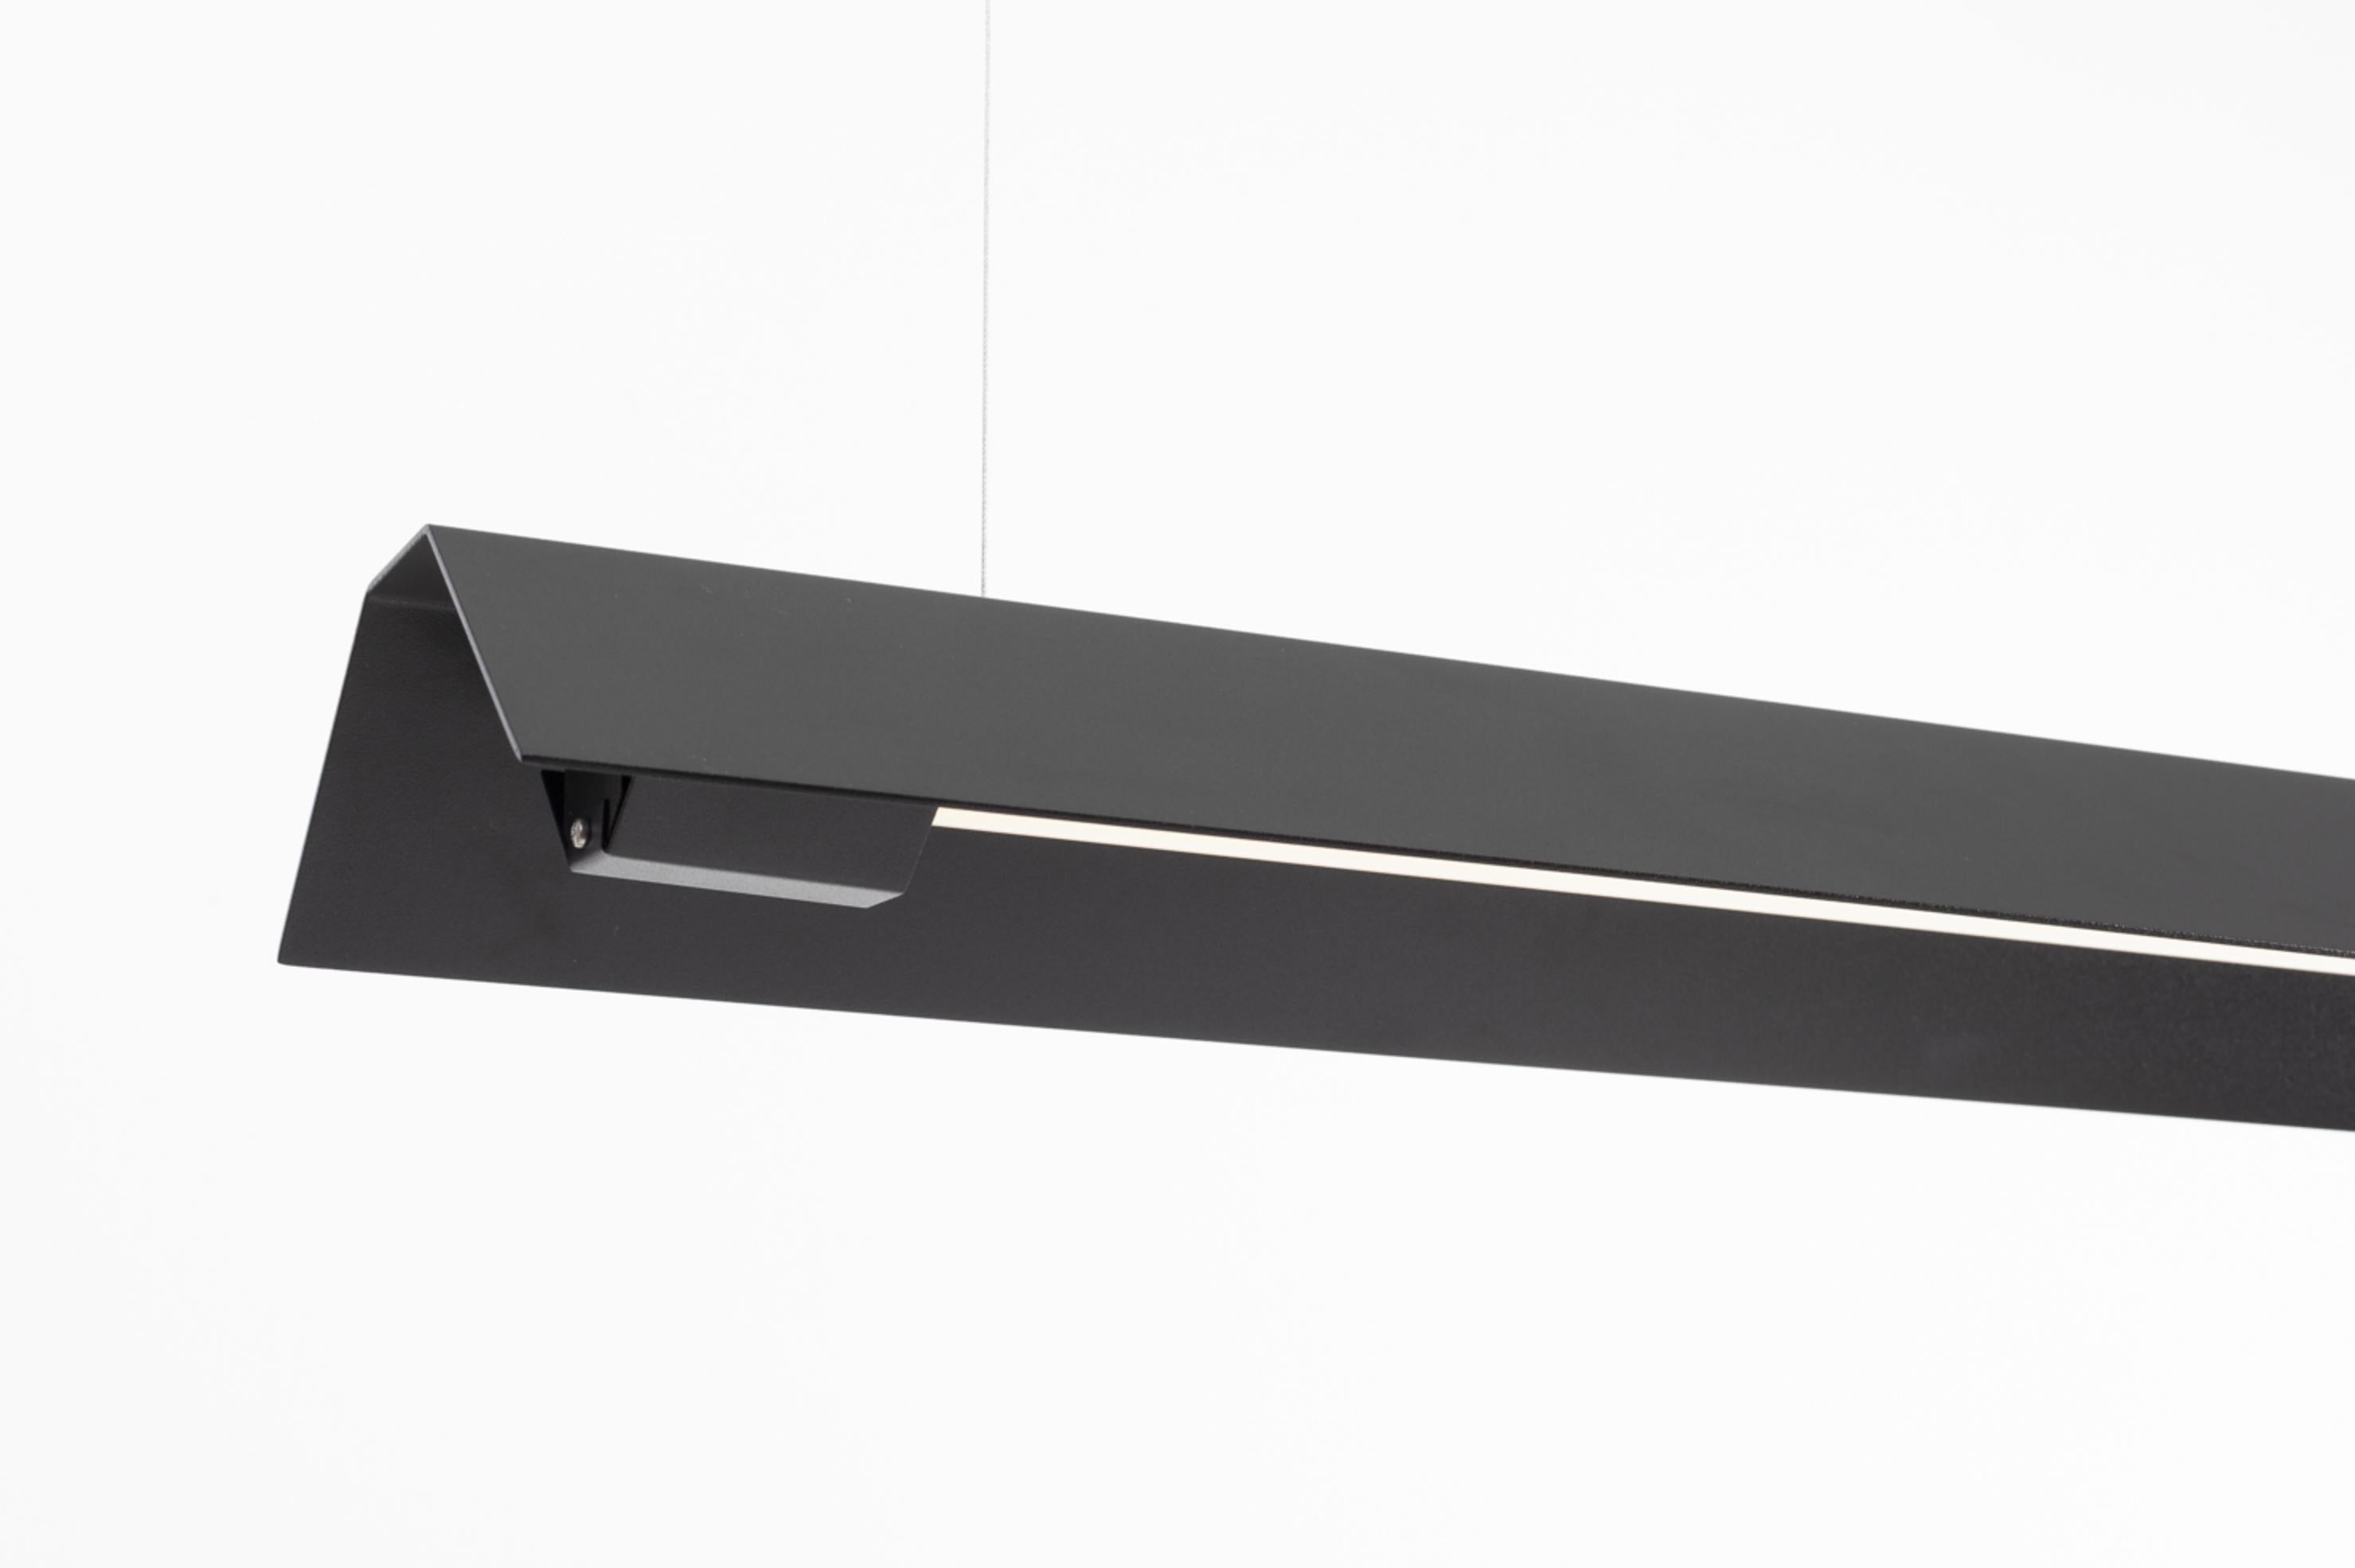 Medium Misalliance Ral Jet Black Suspended Light by Lexavala
Dimensions: D 16 x W 100 x H 8 cm
Materials: powder coated aluminium.

There are two lenghts of socket covers, extending over the LED. Two short are to be found in Suspended and Surface,